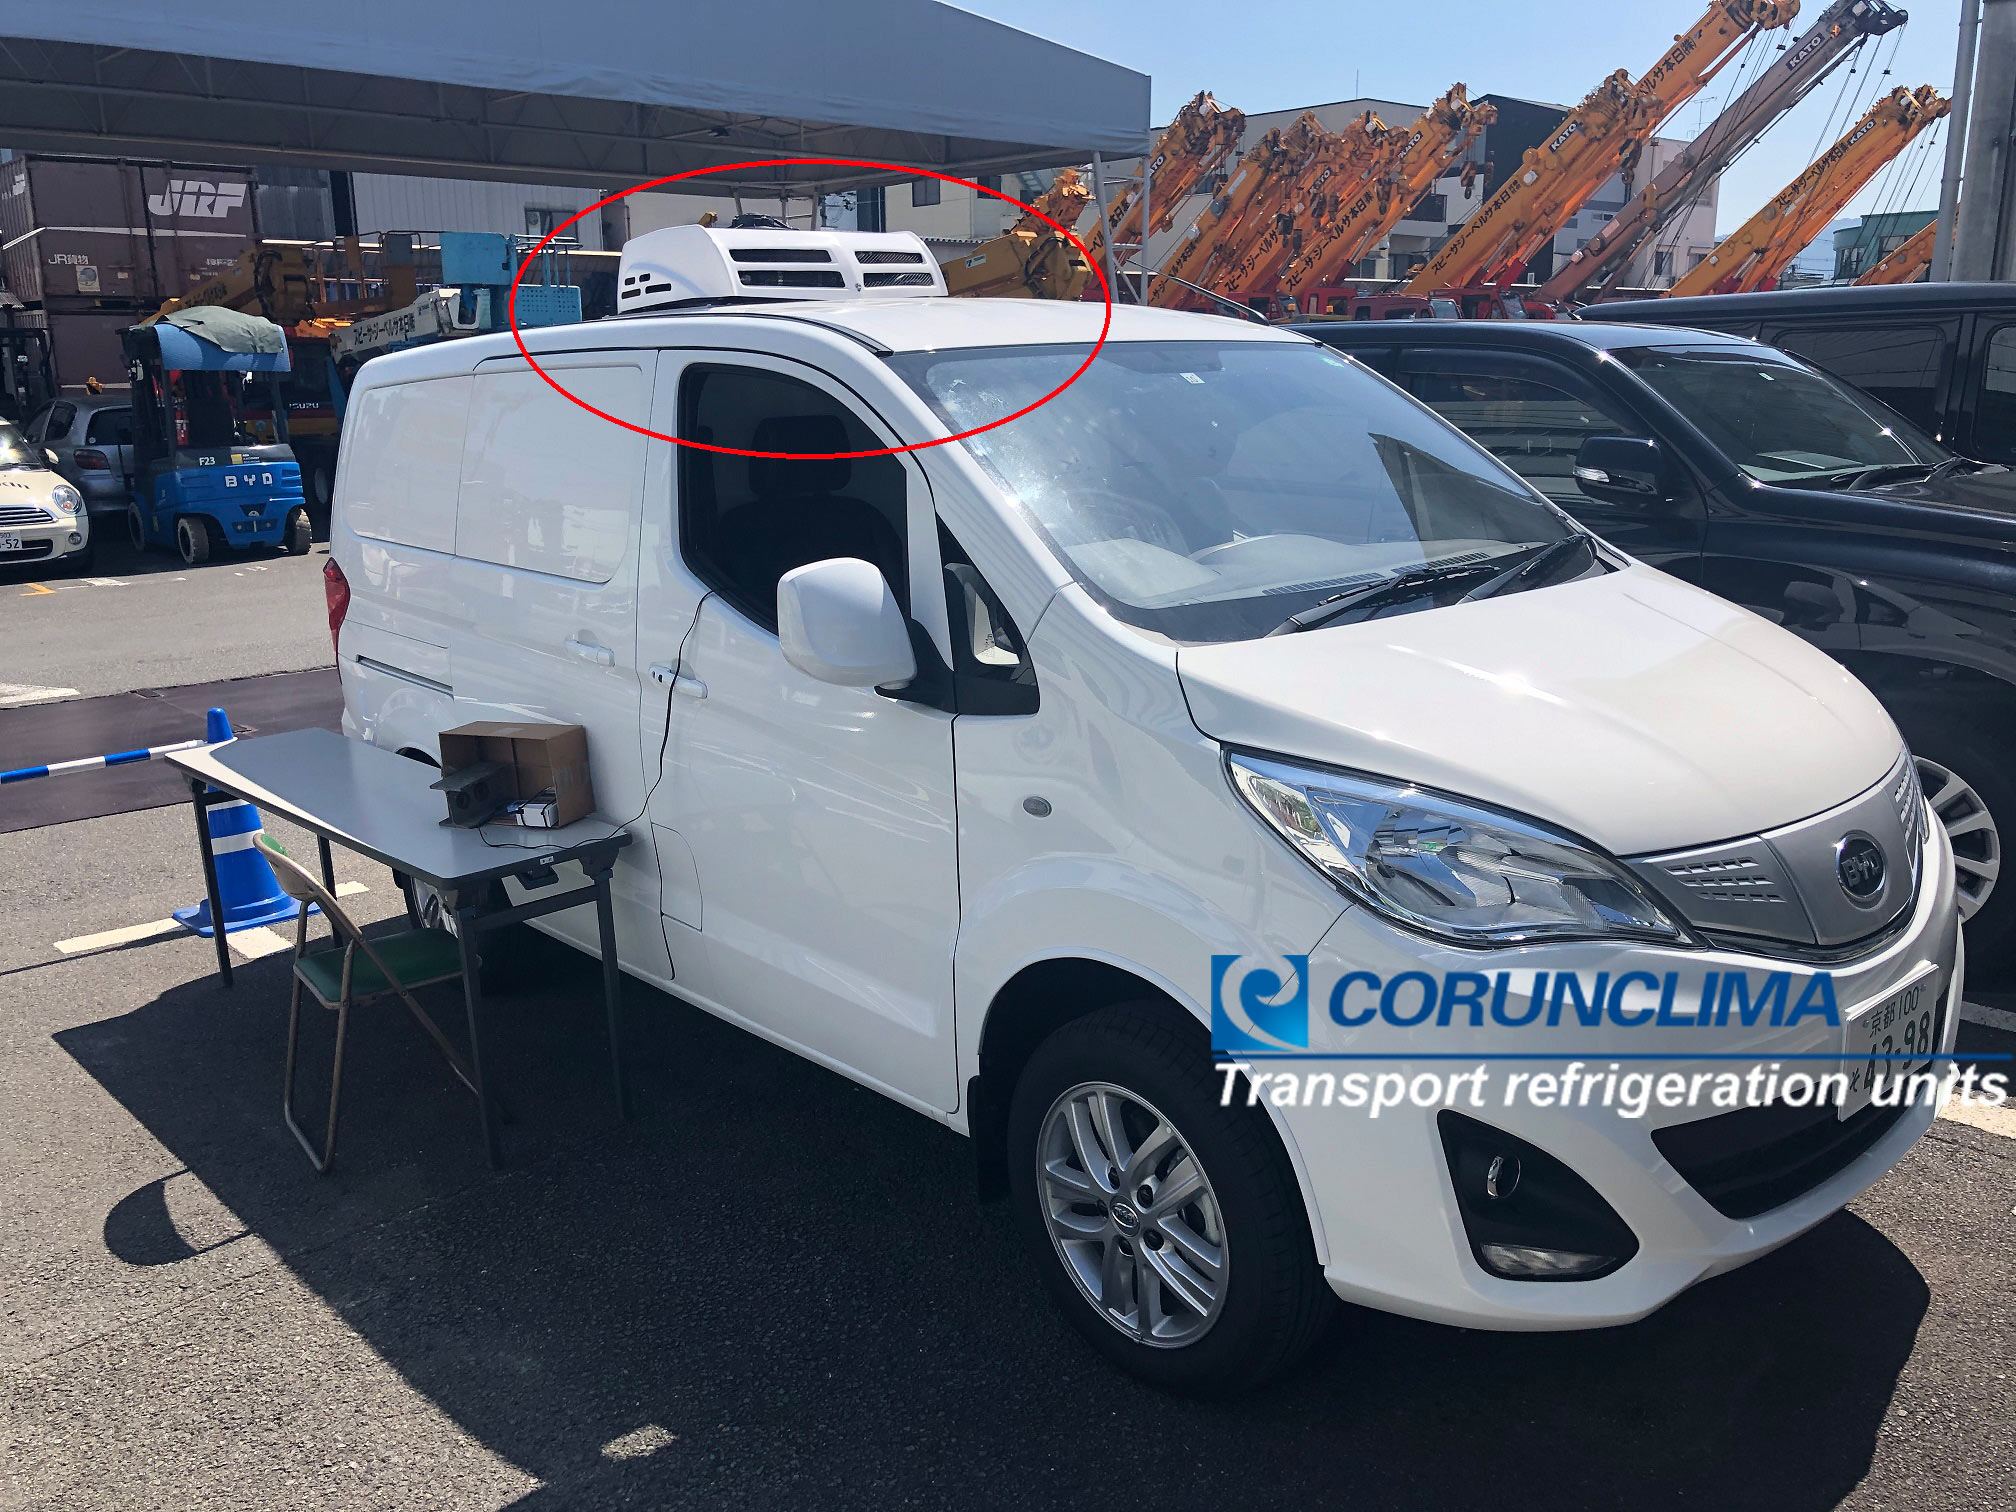 full DC electric refrigeration units for BYD T3 full electric vans